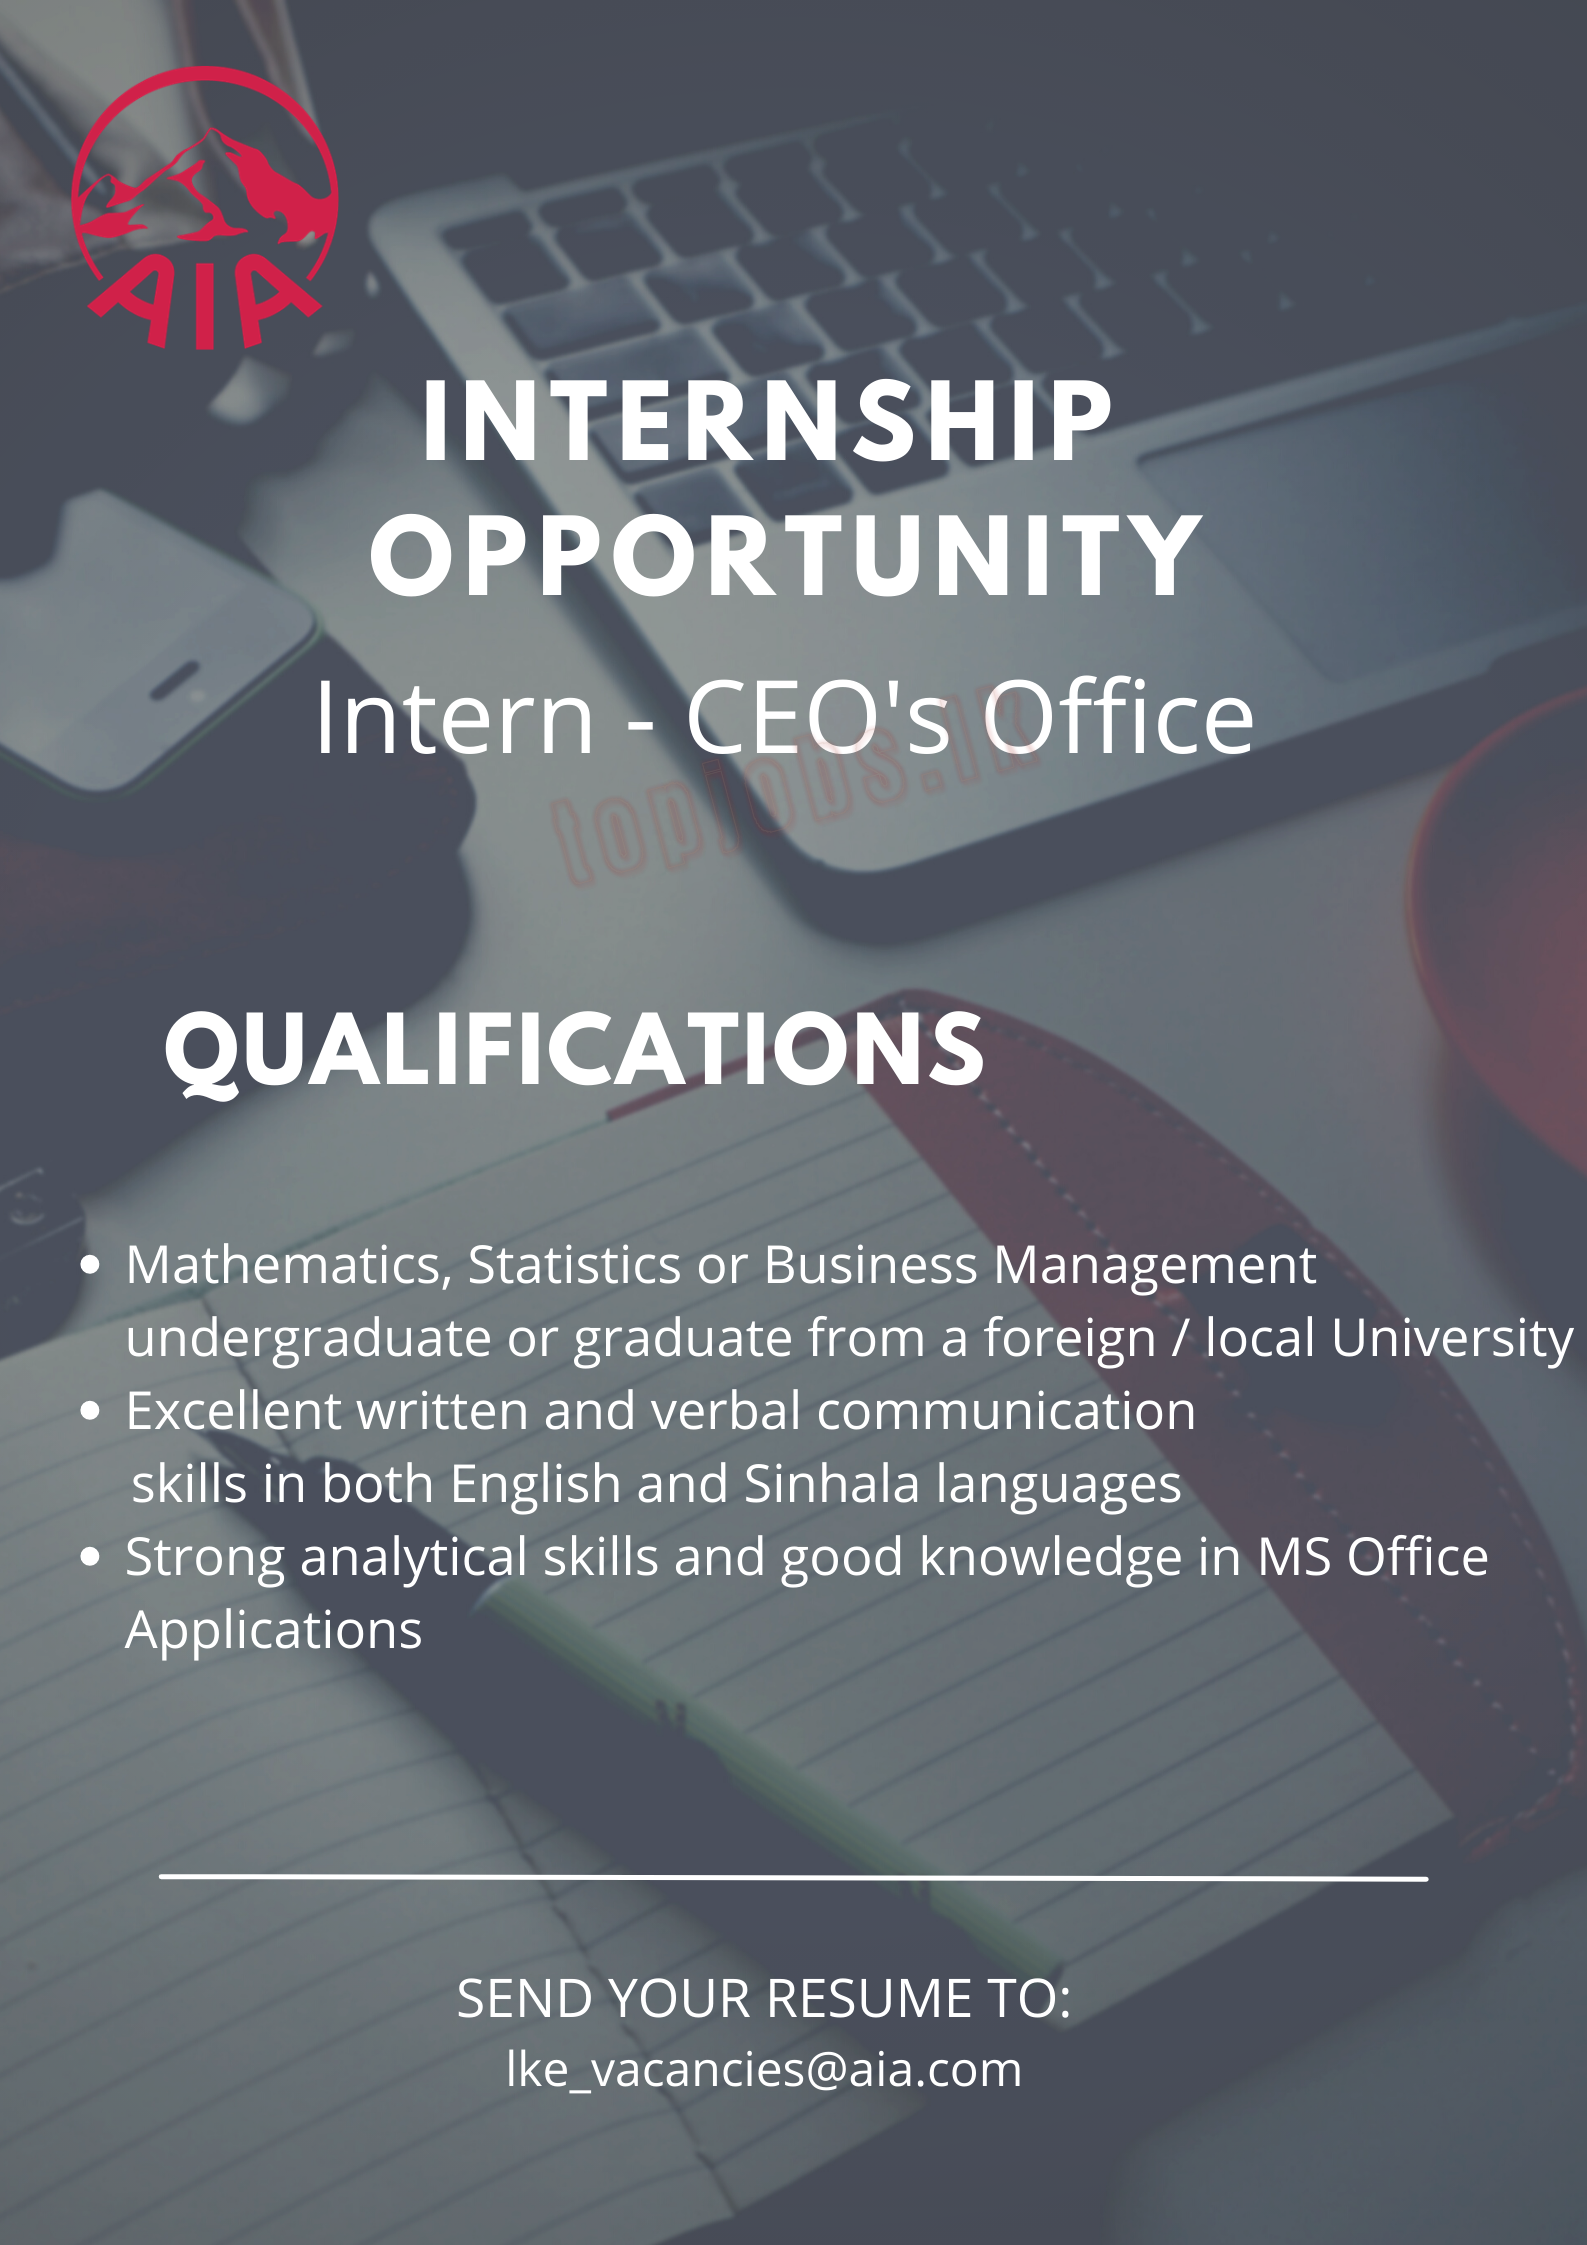 AIA Insurance CEO's Office Vacancies for Intern Application